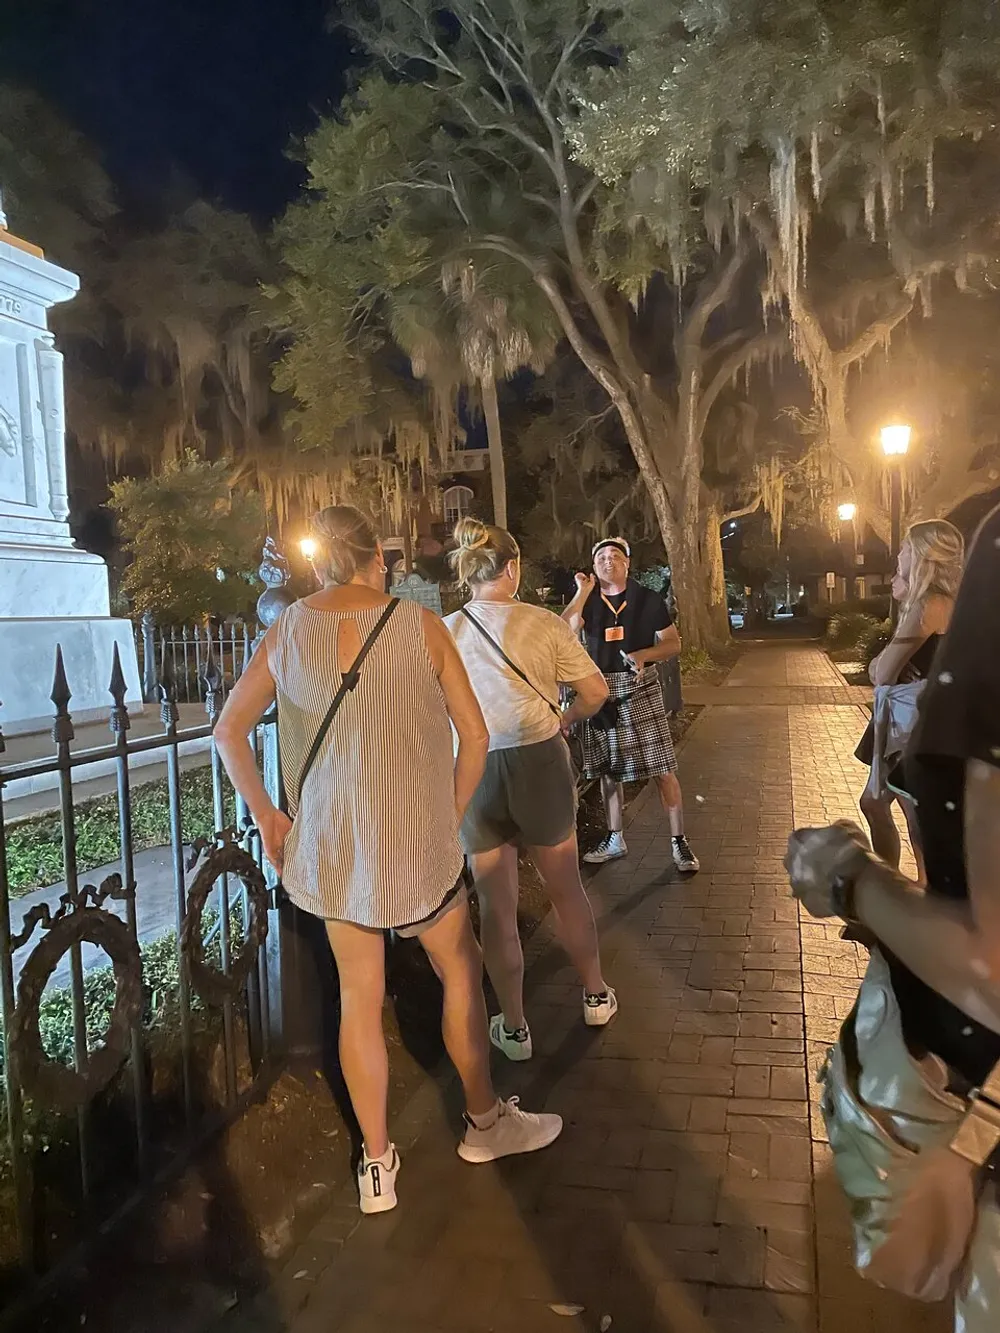 A group of people is gathered at night possibly on a tour listening to a guide who is speaking and gesturing surrounded by trees with Spanish moss and the glow of streetlights